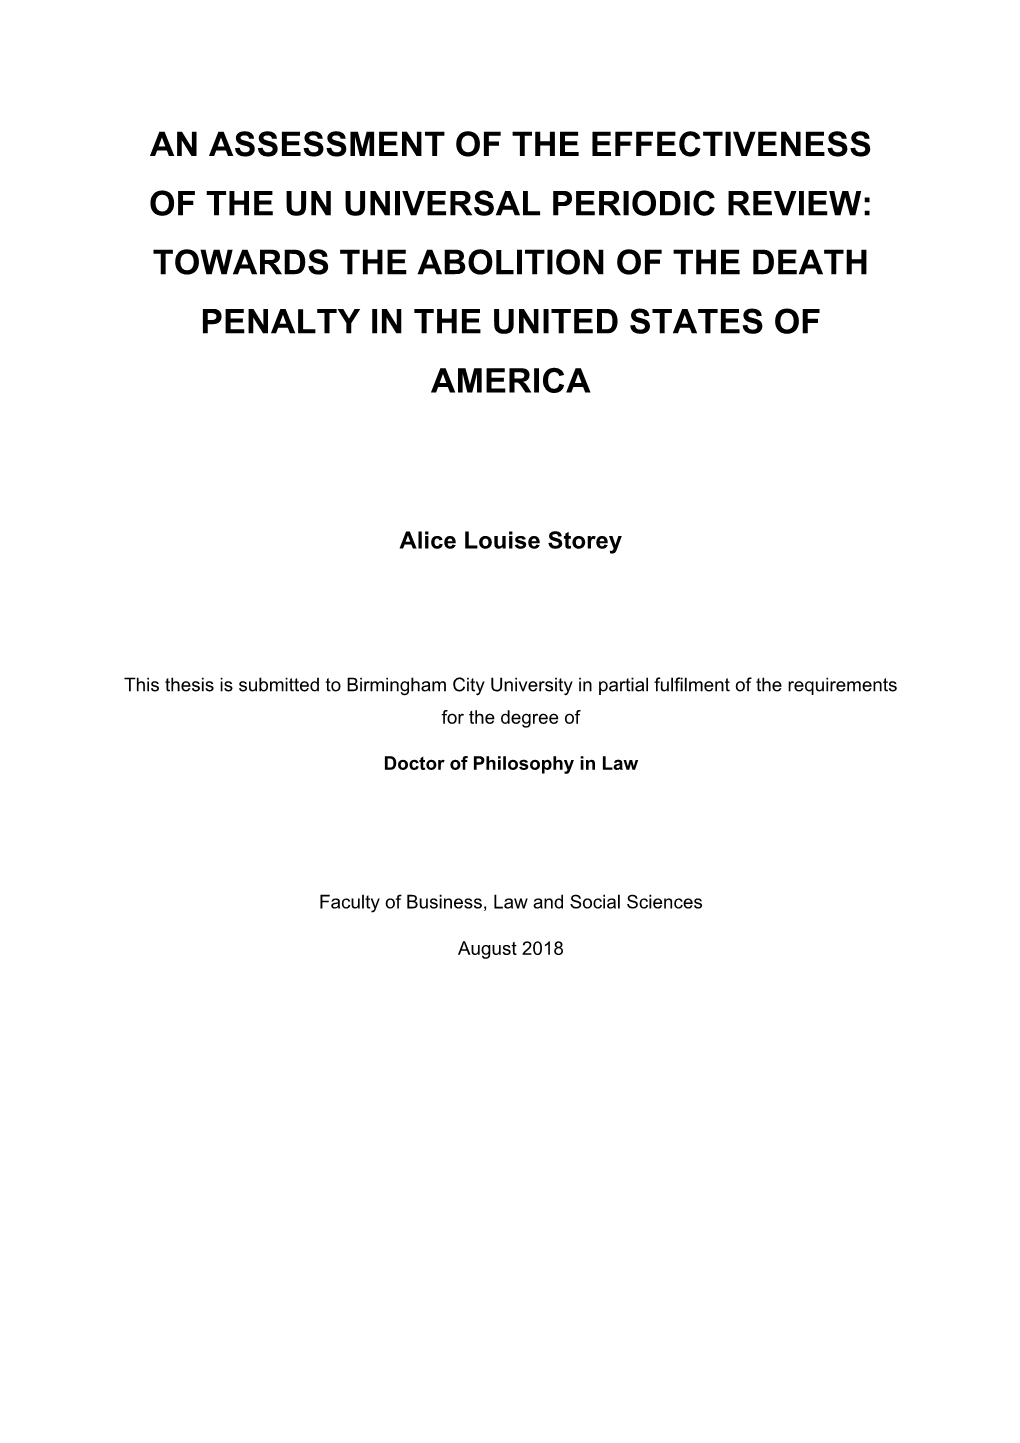 Towards the Abolition of the Death Penalty in the United States of America